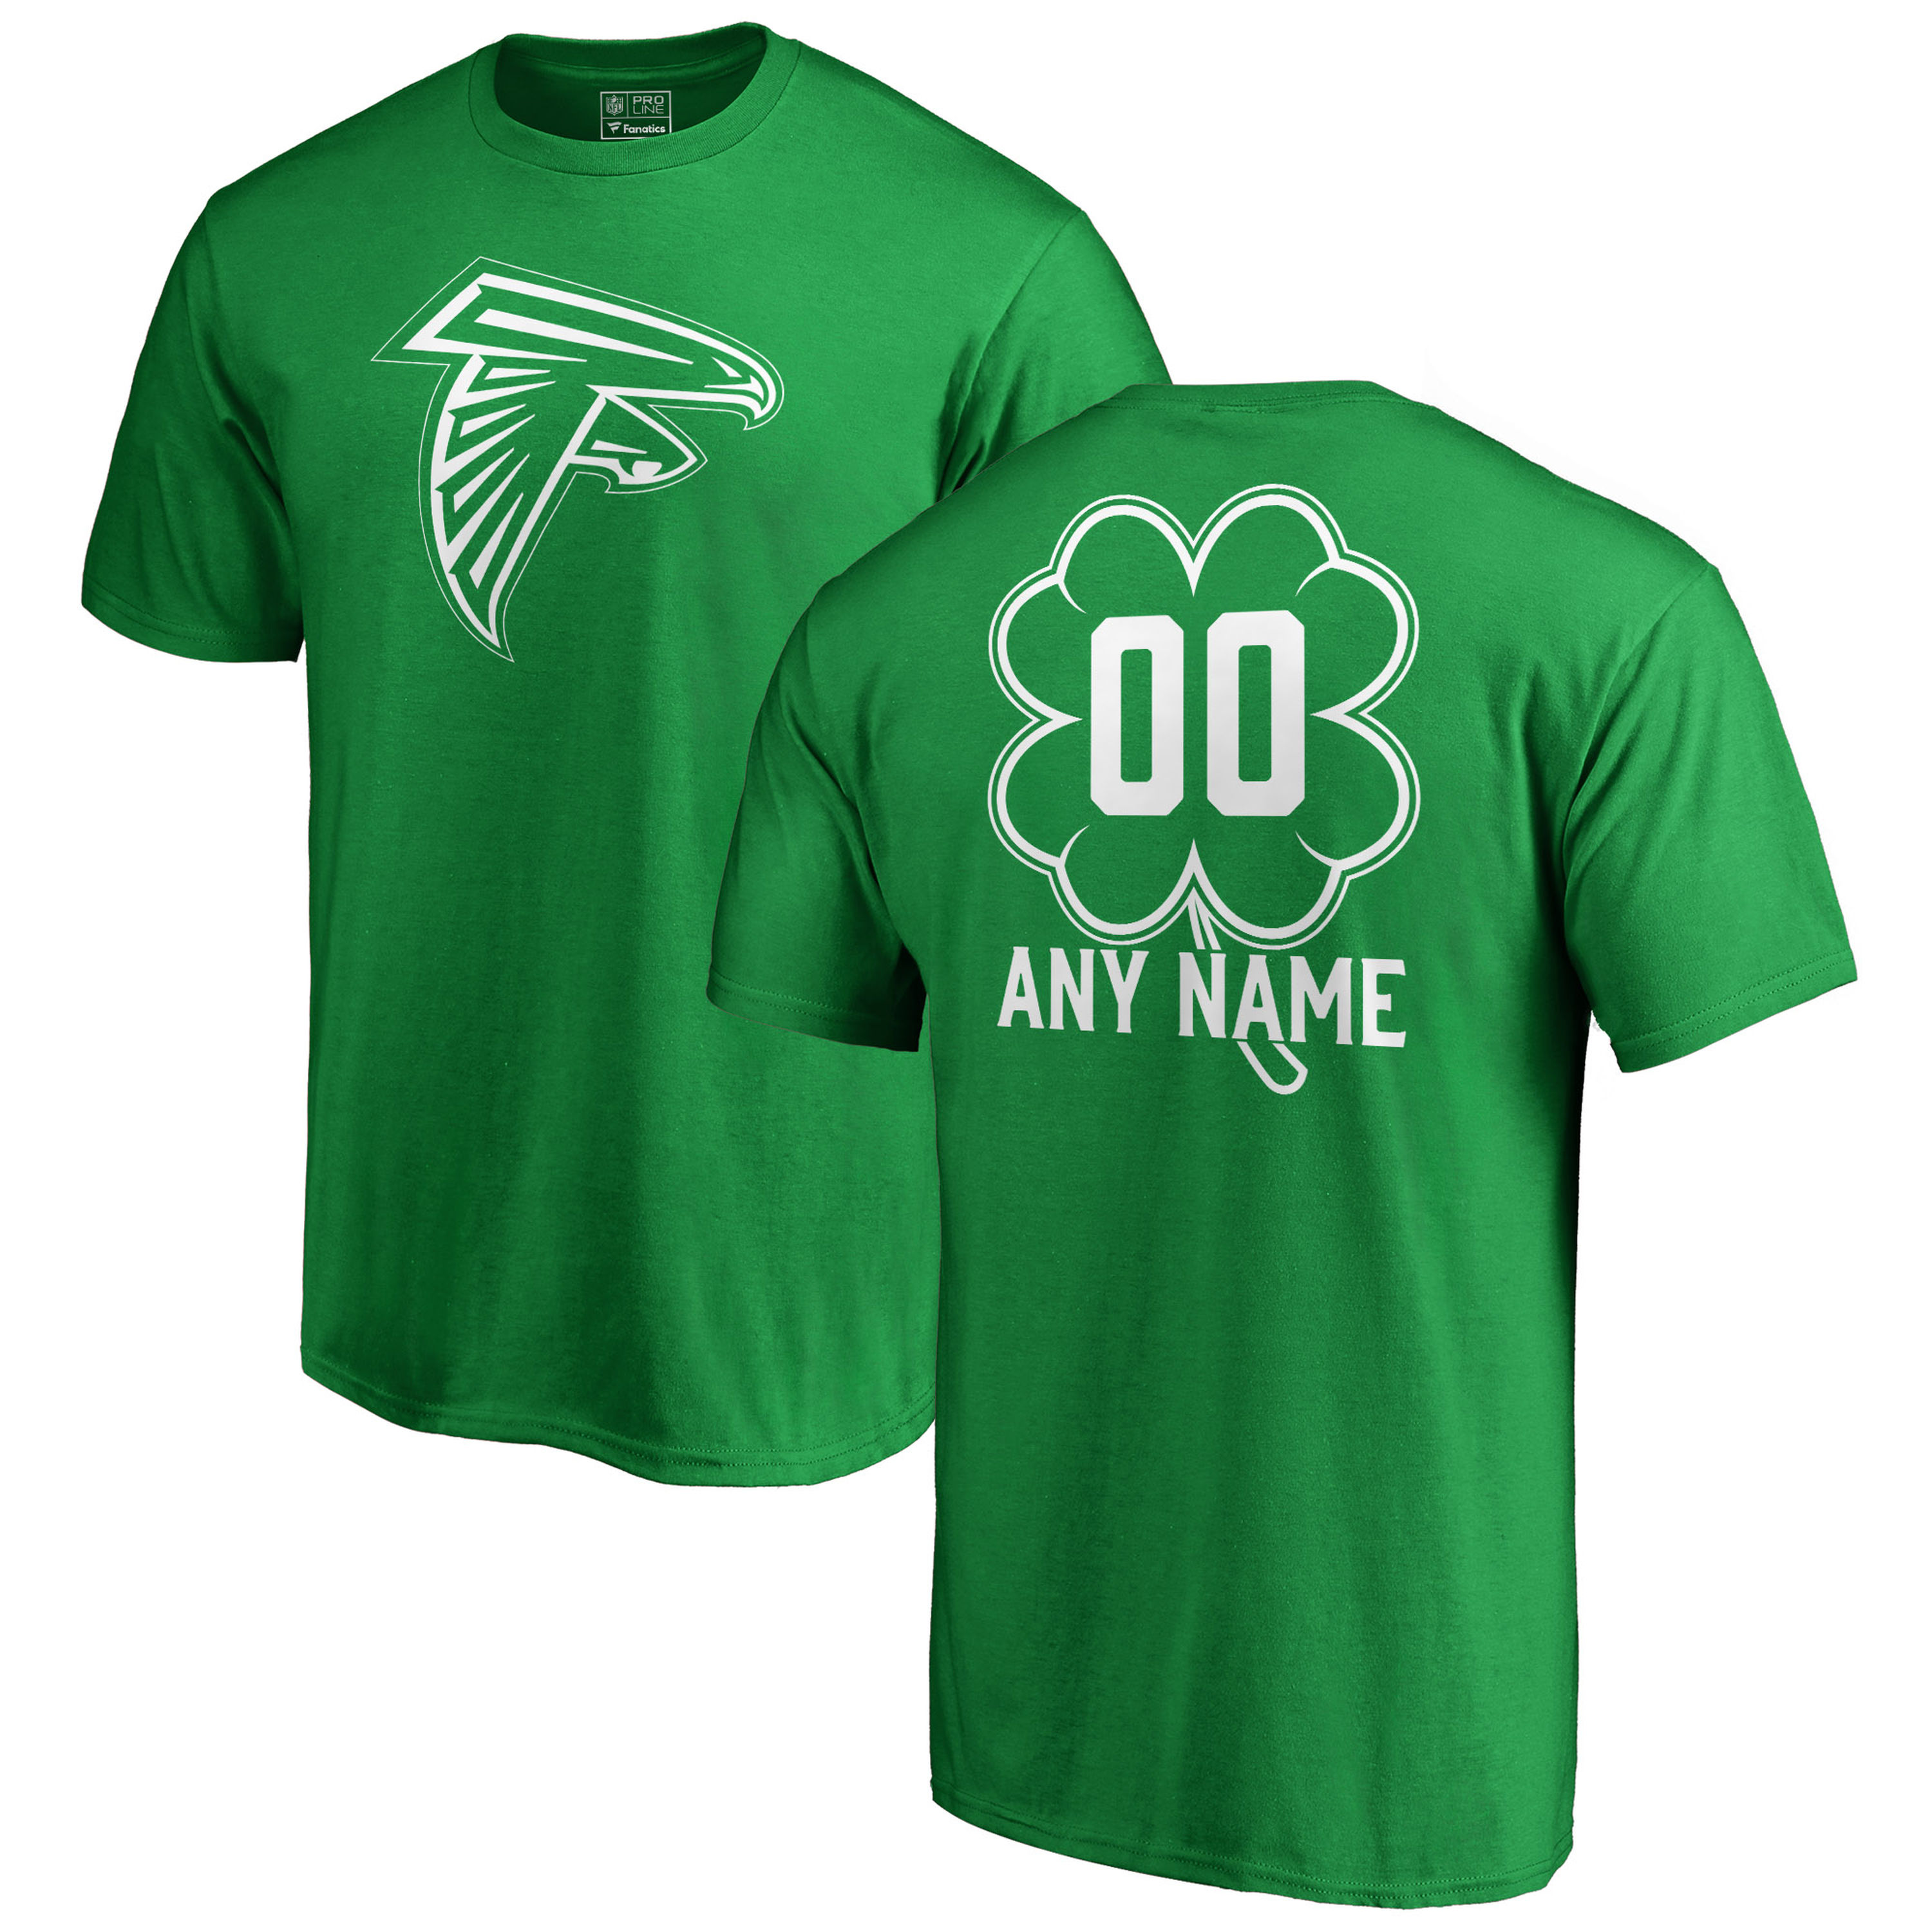 Men's Atlanta Falcons NFL Pro Line by Fanatics Branded Kelly Green St. Patrick's Day Personalized Name & Number T-Shirt